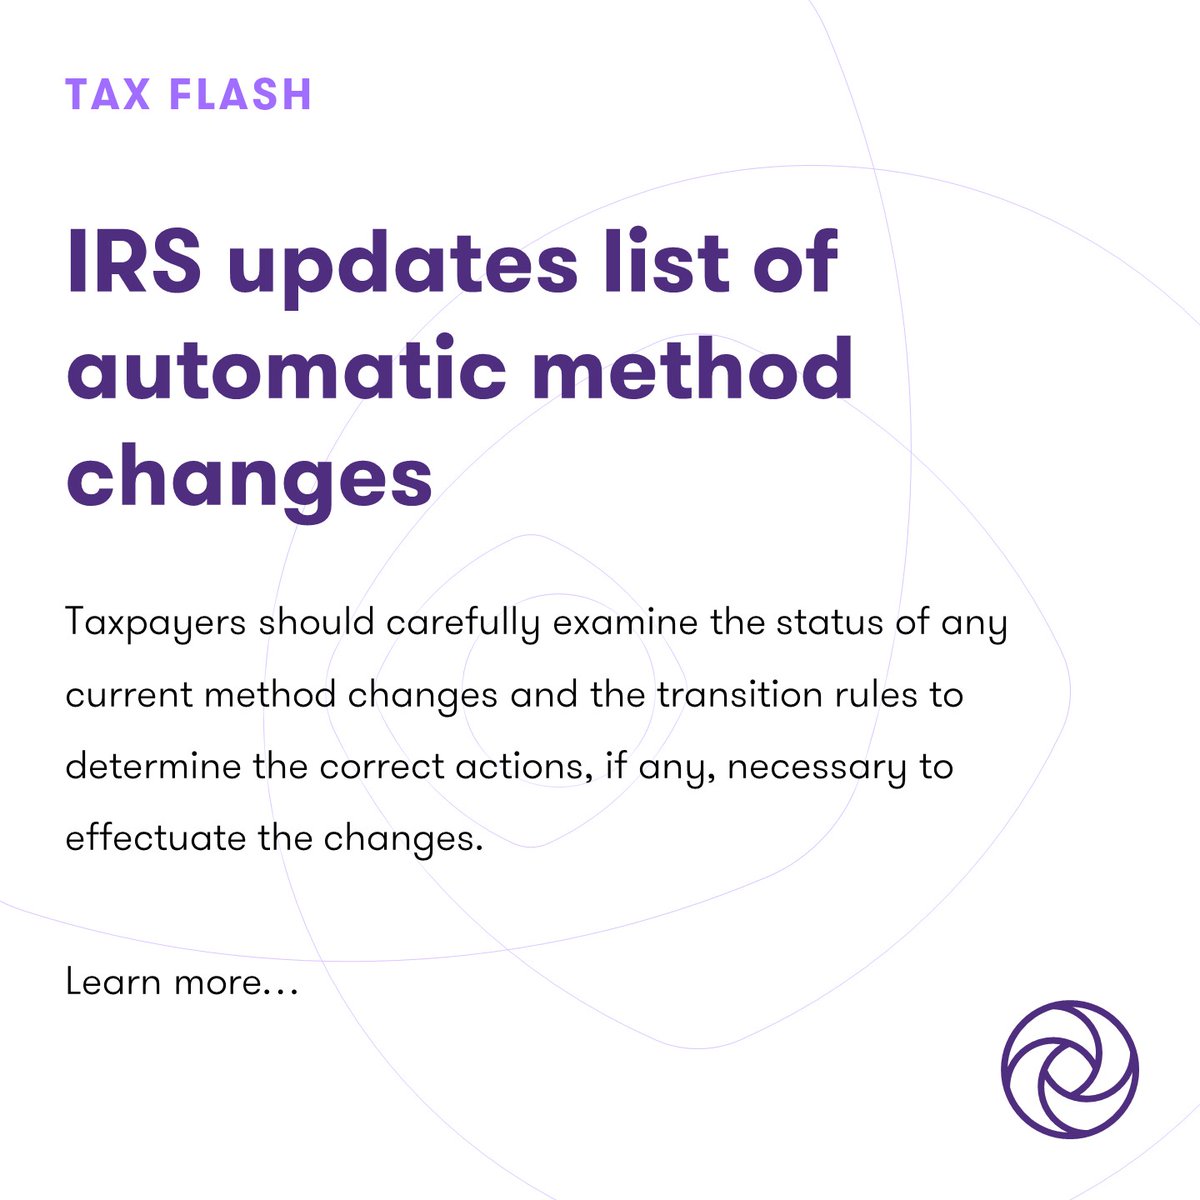 #TaxUpdate: The #IRS has released new guidance on automatic method changes, modifying, clarifying and eliminating several important method changes. Dive into the details, including effective dates and transition rules to ensure you're up-to-date. gt-us.co/4bqAWdC #Taxes